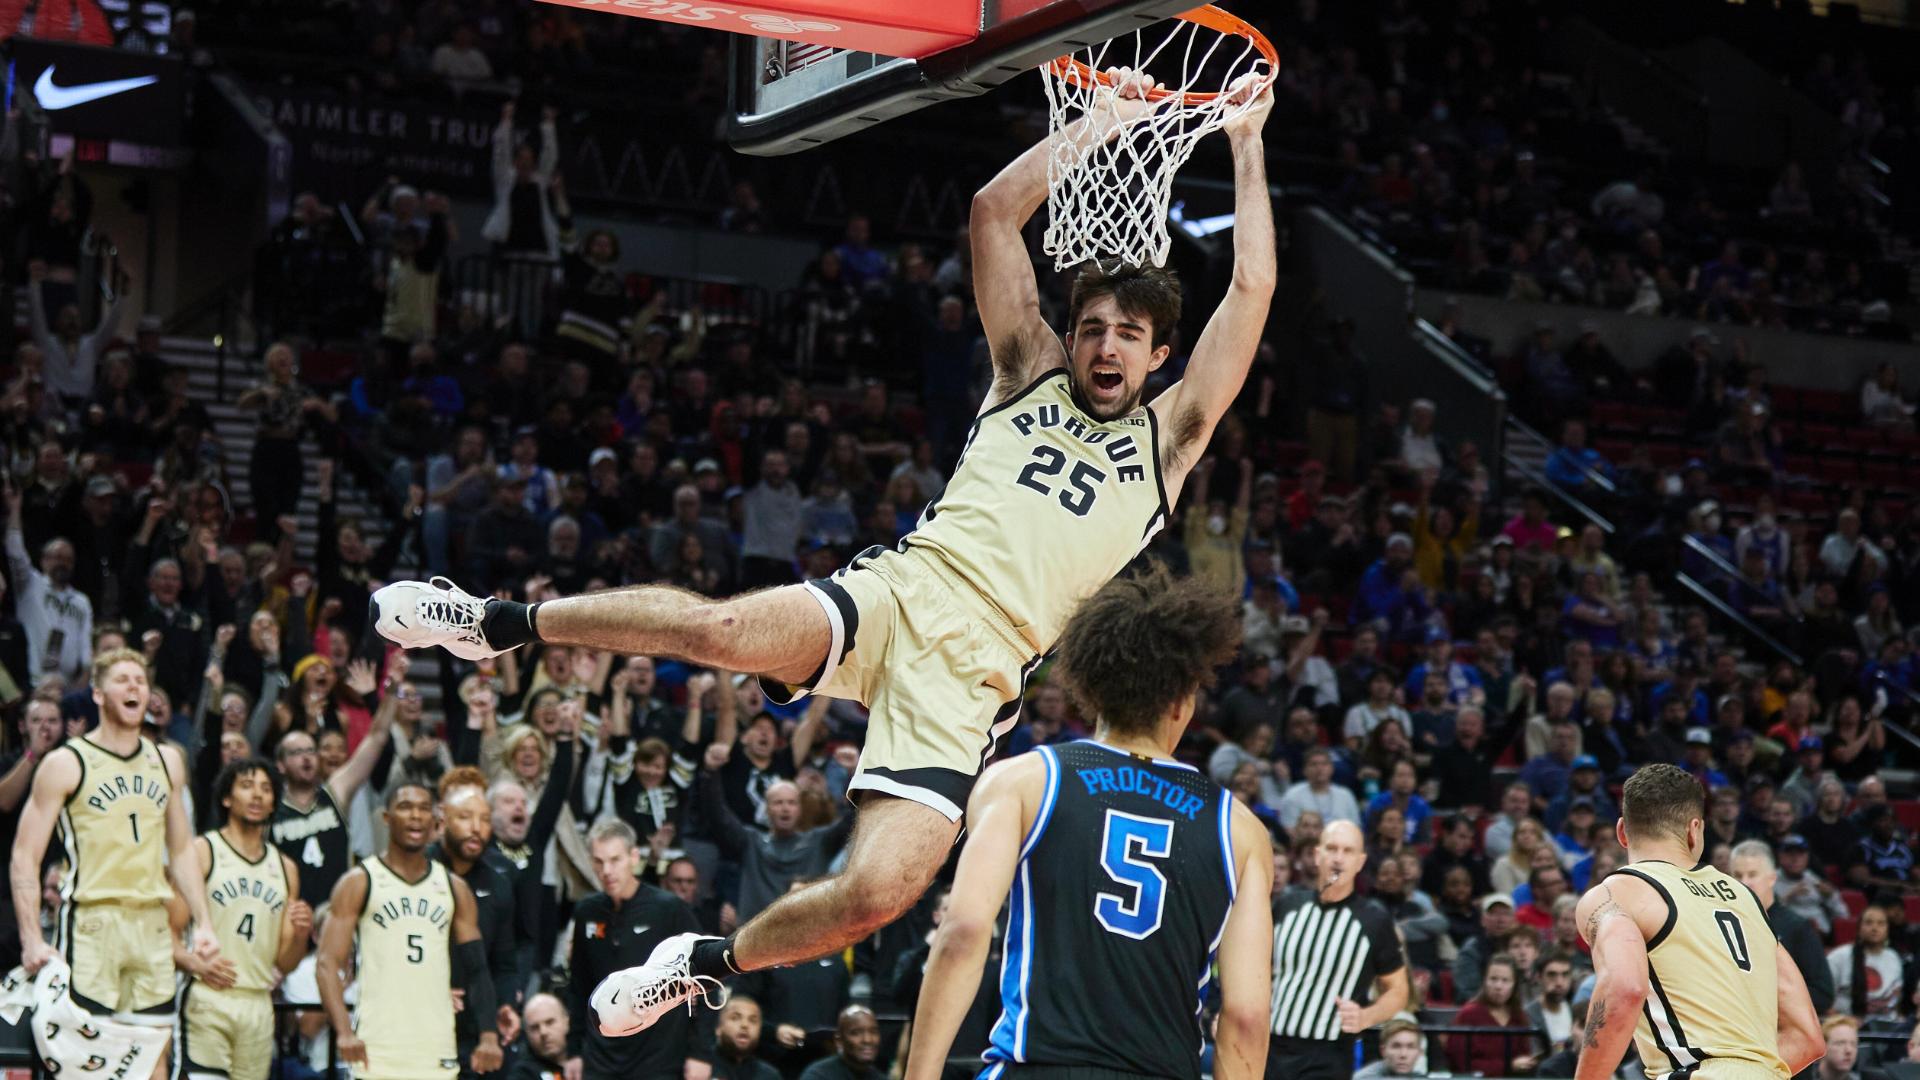 Purdue Routs 8th Ranked Duke, 75-56